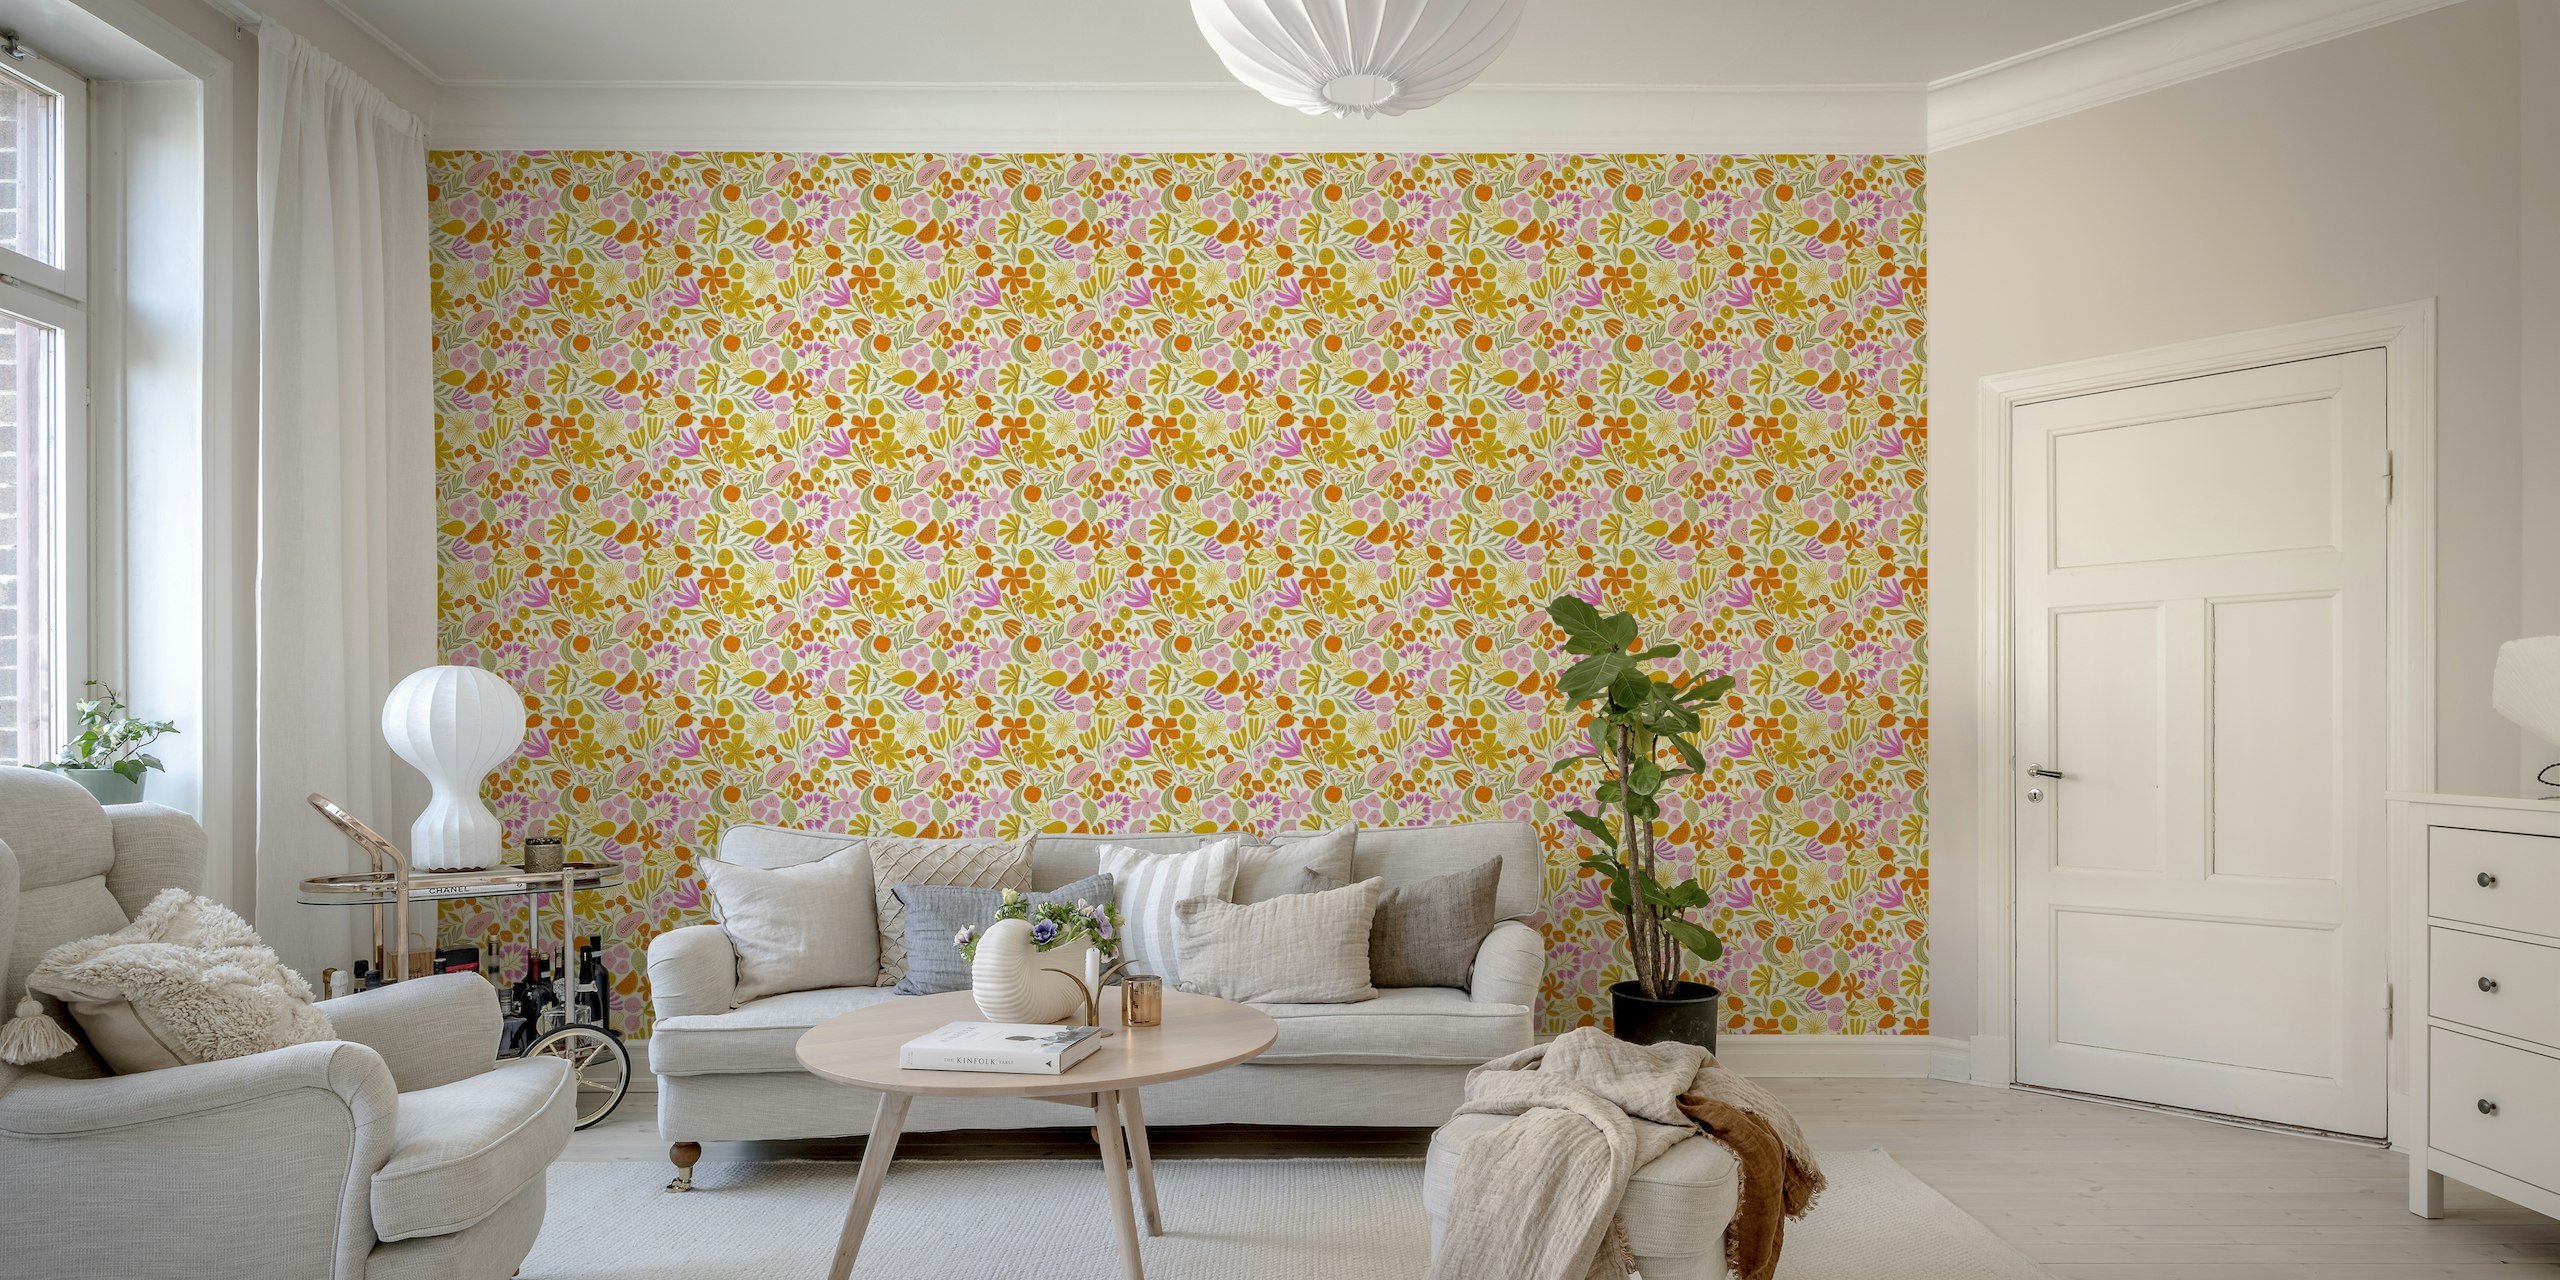 Ambrosia light floral and fruit wall mural with soft pastel colors